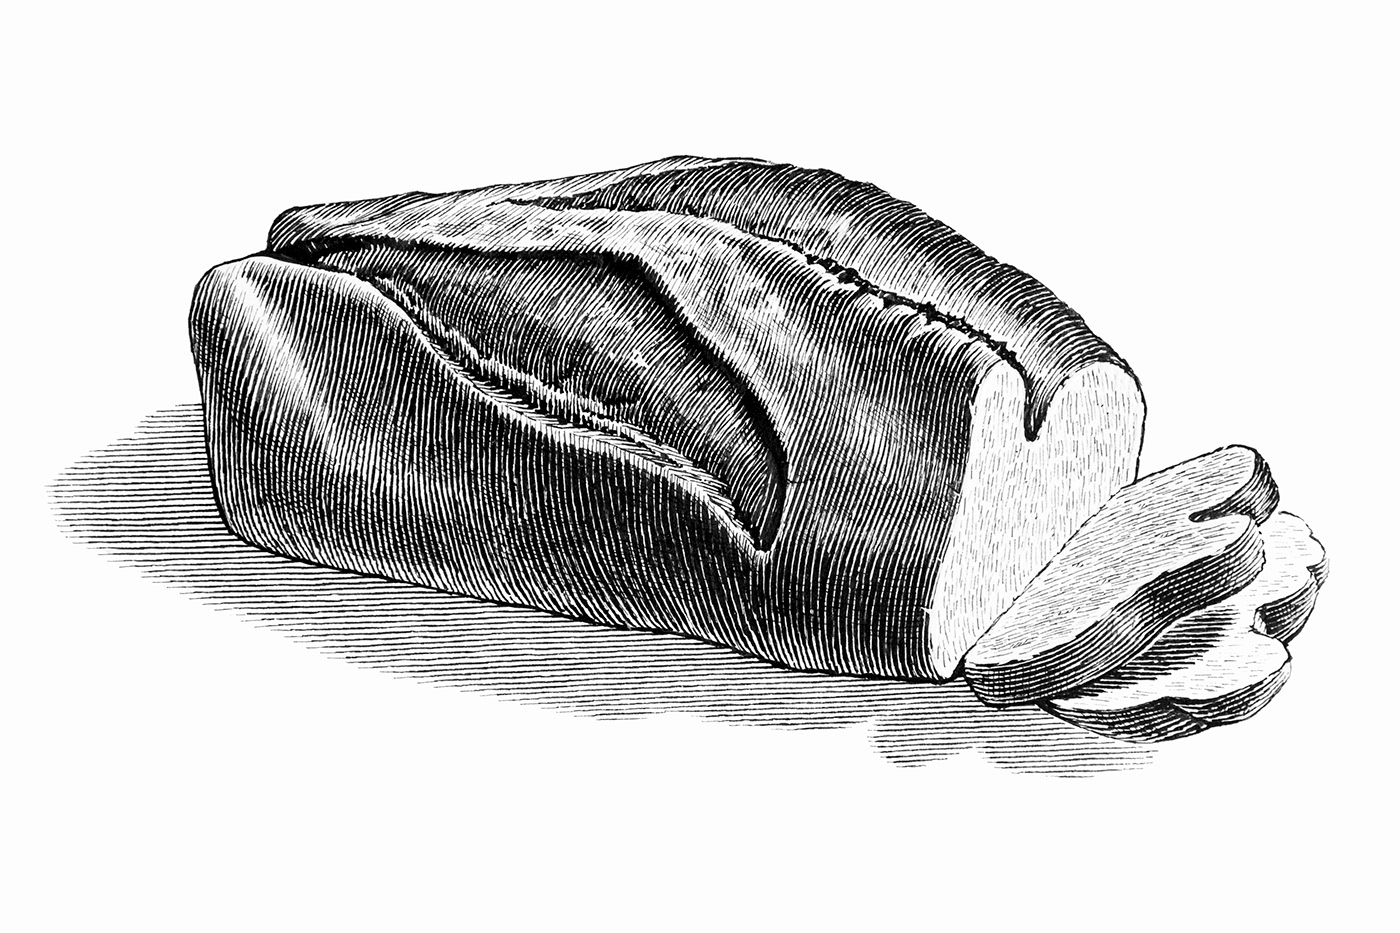 illustrations scratch board style breads Whole foods hand drawn engraving style illustration Illustrator